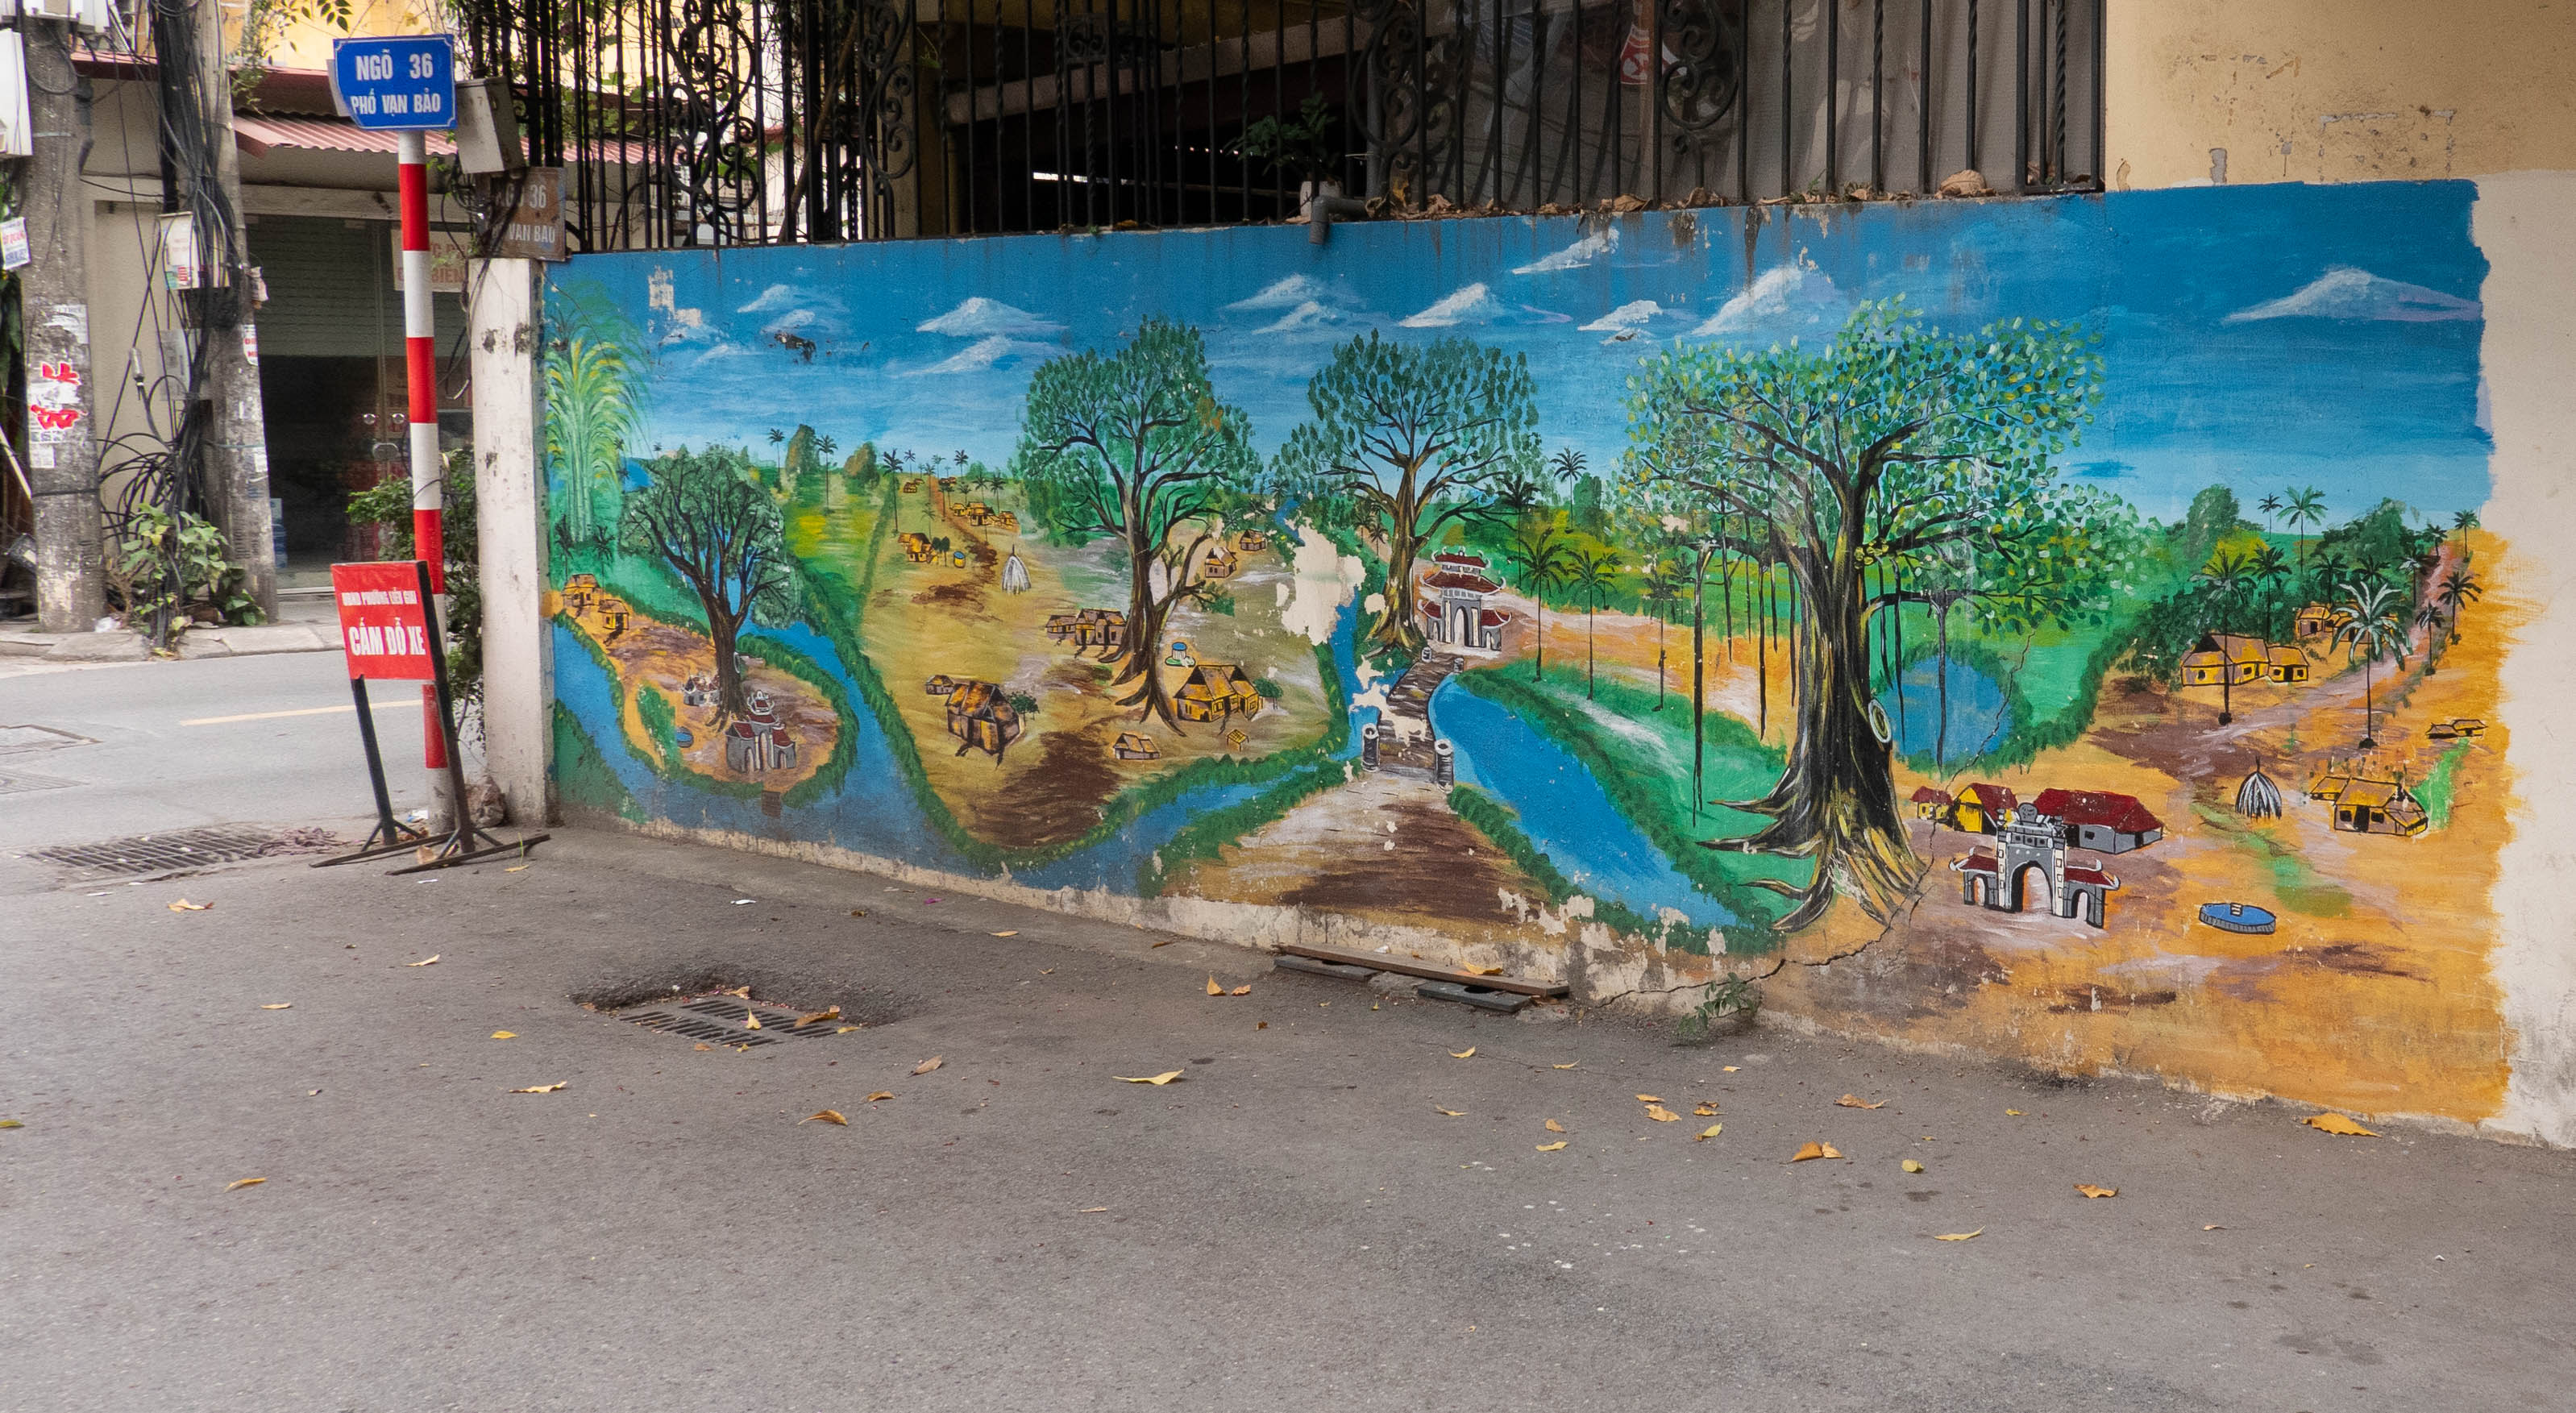 Mural of countryside on a wall in an alley off a street